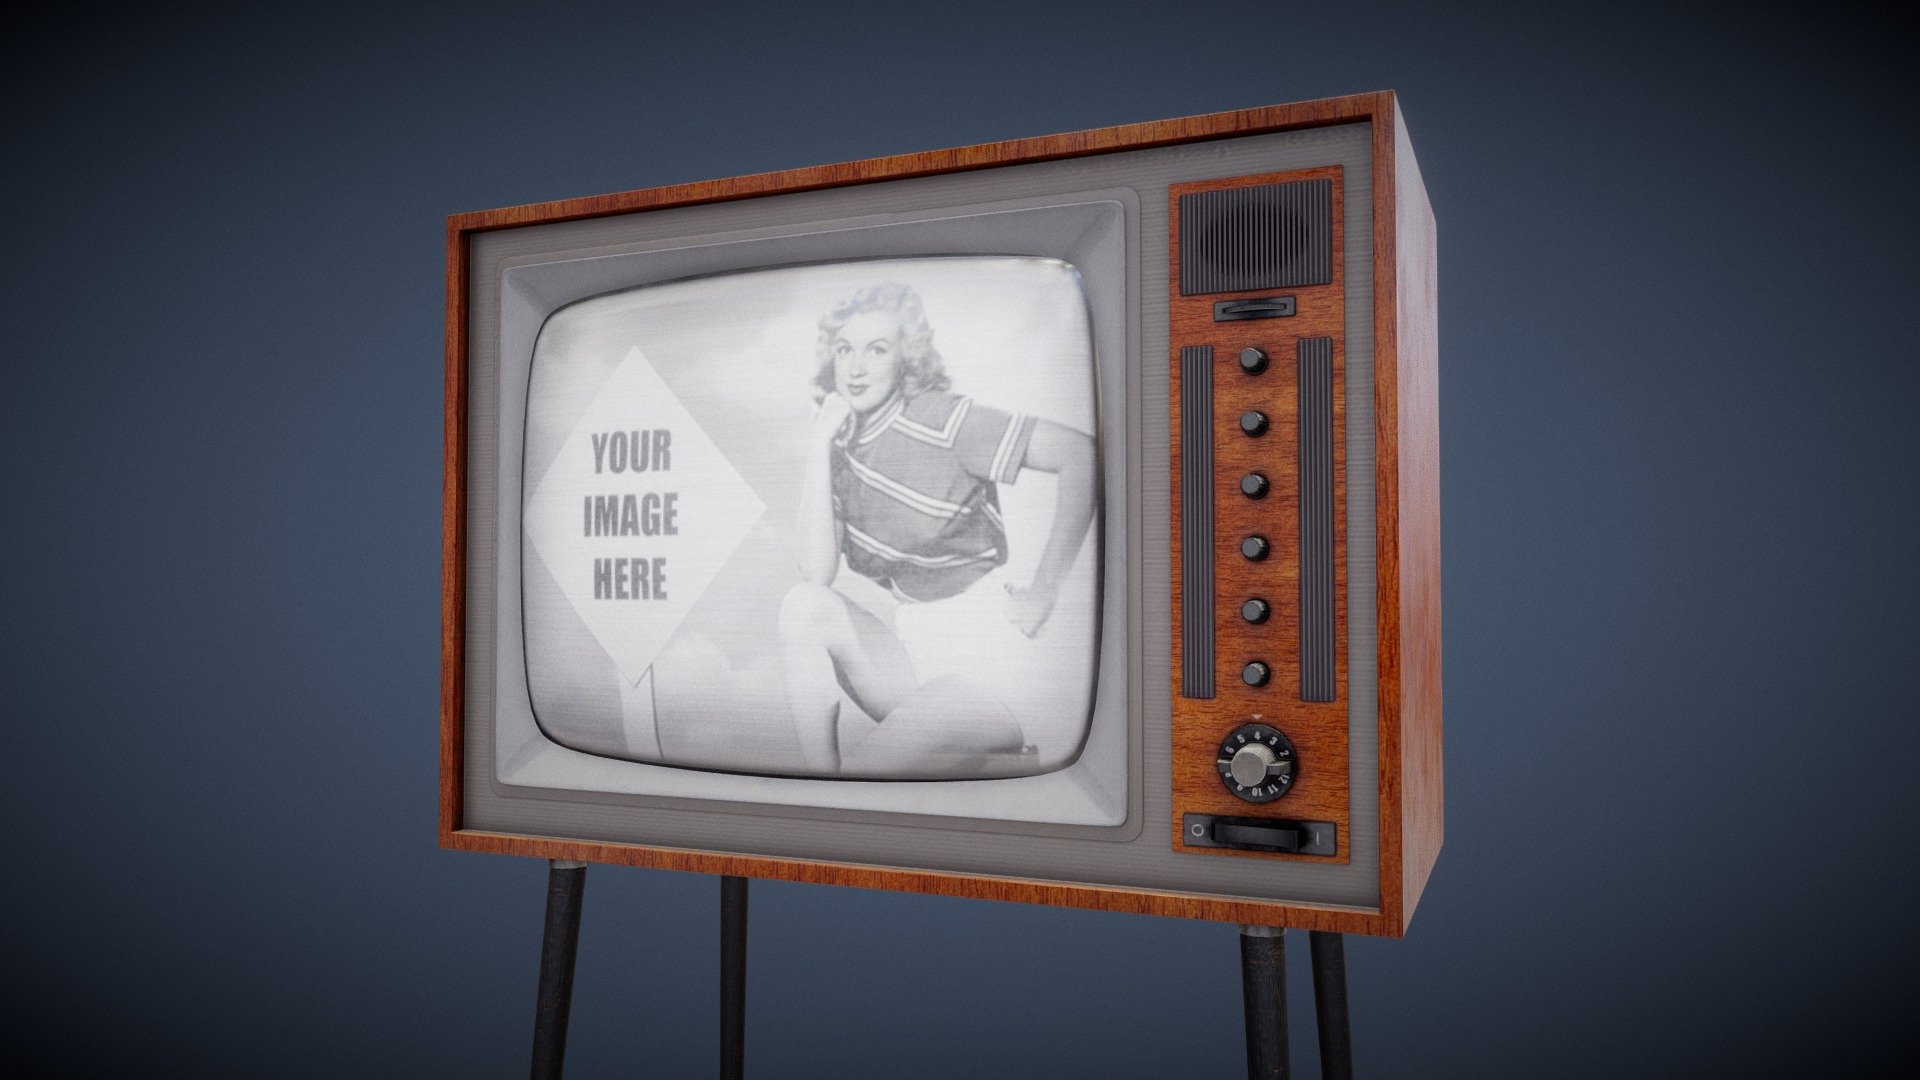 The preview uses compressed JPG textures for better browsing experience.

HD renders: https://www.artstation.com/artwork/Kr5XZ4

Low-poly vintage TV asset with high resolution PBR textures. Has separate texture set for the screen which allows you to easily display your own picture using the provided PSD template.

Switch and channel selector are separated objects parented to the TV body.

Texture format: PNG 4096x4096 (main material) and 1024x1024 (screen)

Model formats provided:




BLEND

FBX

OBJ

UNITYPACKAGE

Heads up! Here you can download FREE version of this 3d model with lower resolution textures and check its quality before buying 3d model